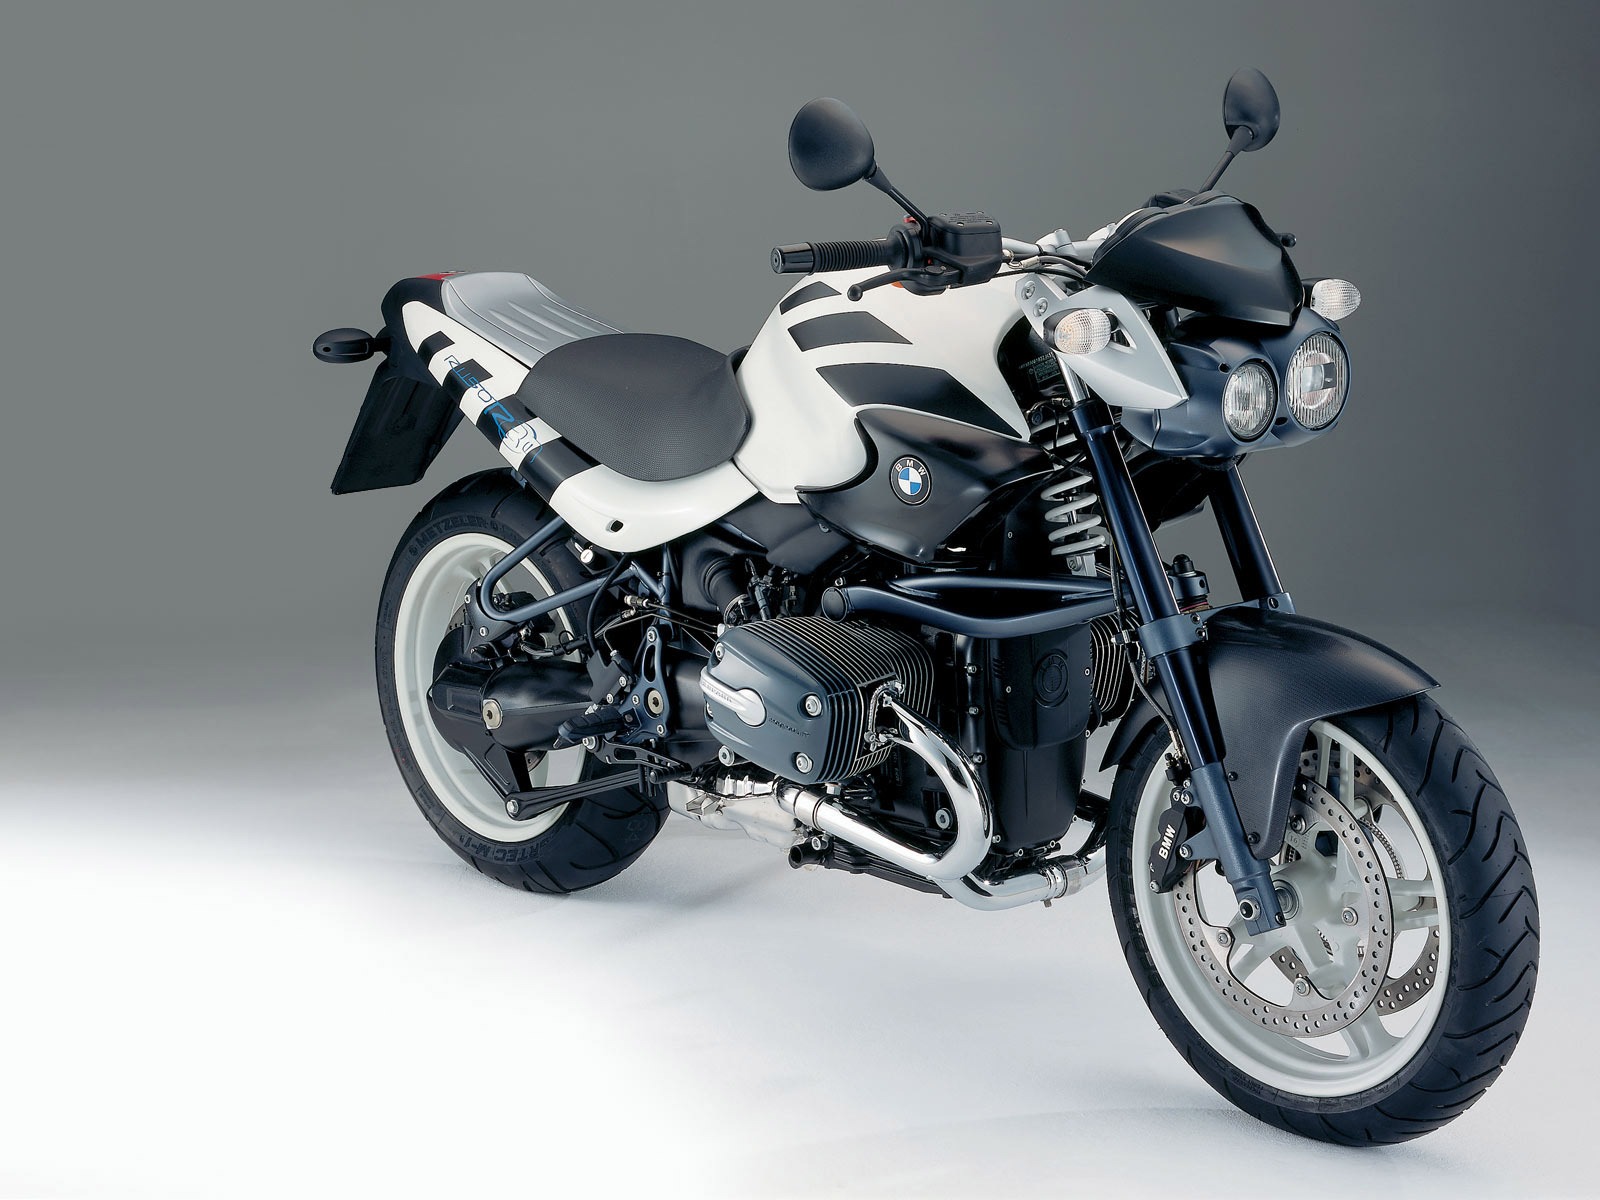 BMW motorcycle wallpapers (2) #3 - 1600x1200